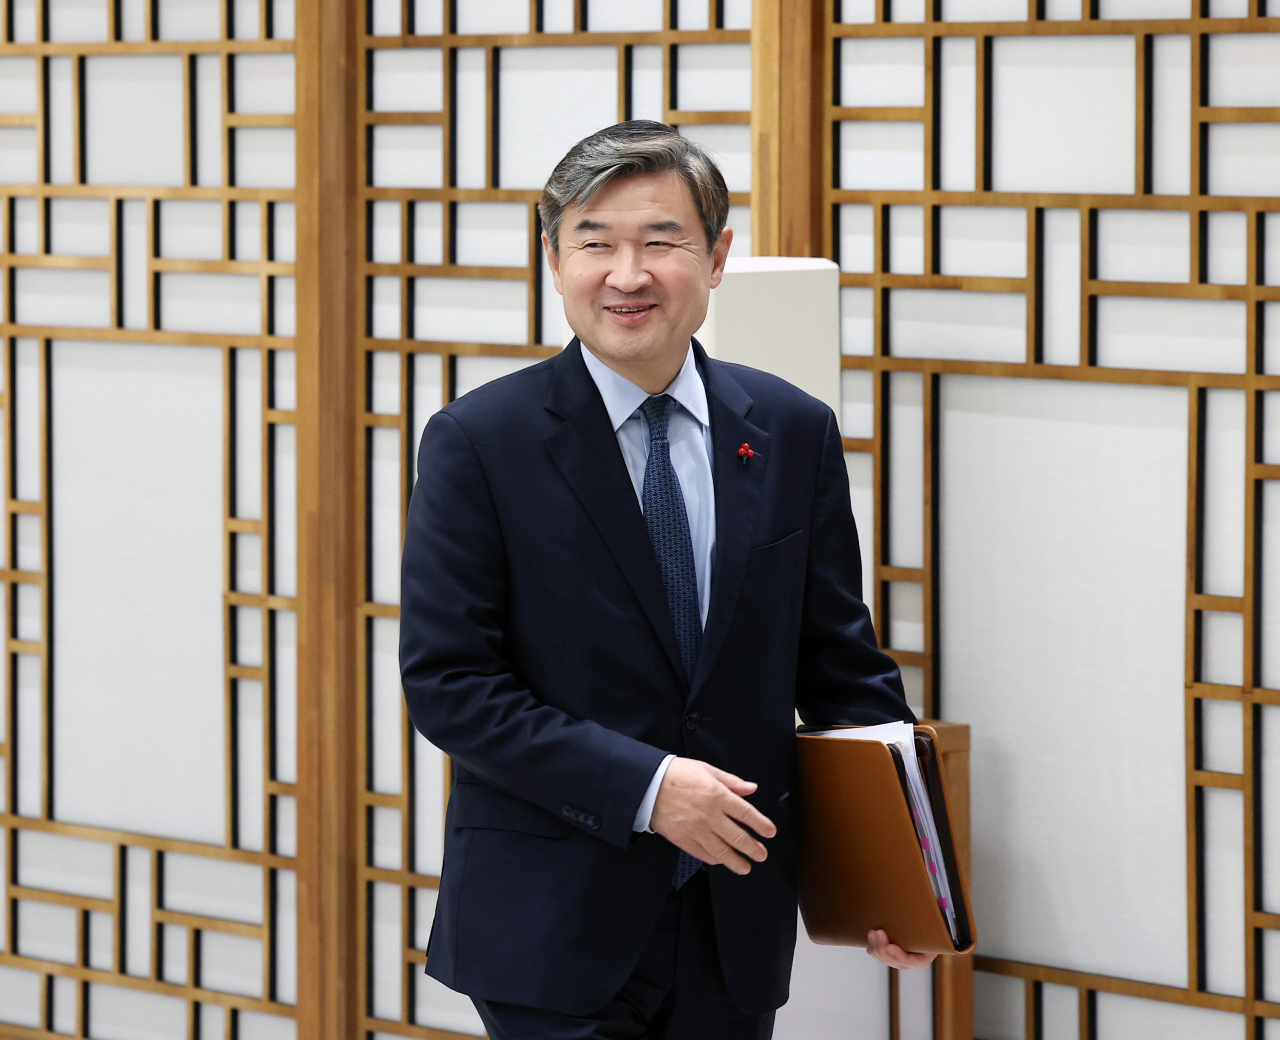 Cho Tae-yong, 67, was nominated by South Korean President Yoon Suk Yeol on Tuesday to head the National Intelligence Service. (Yonhap)